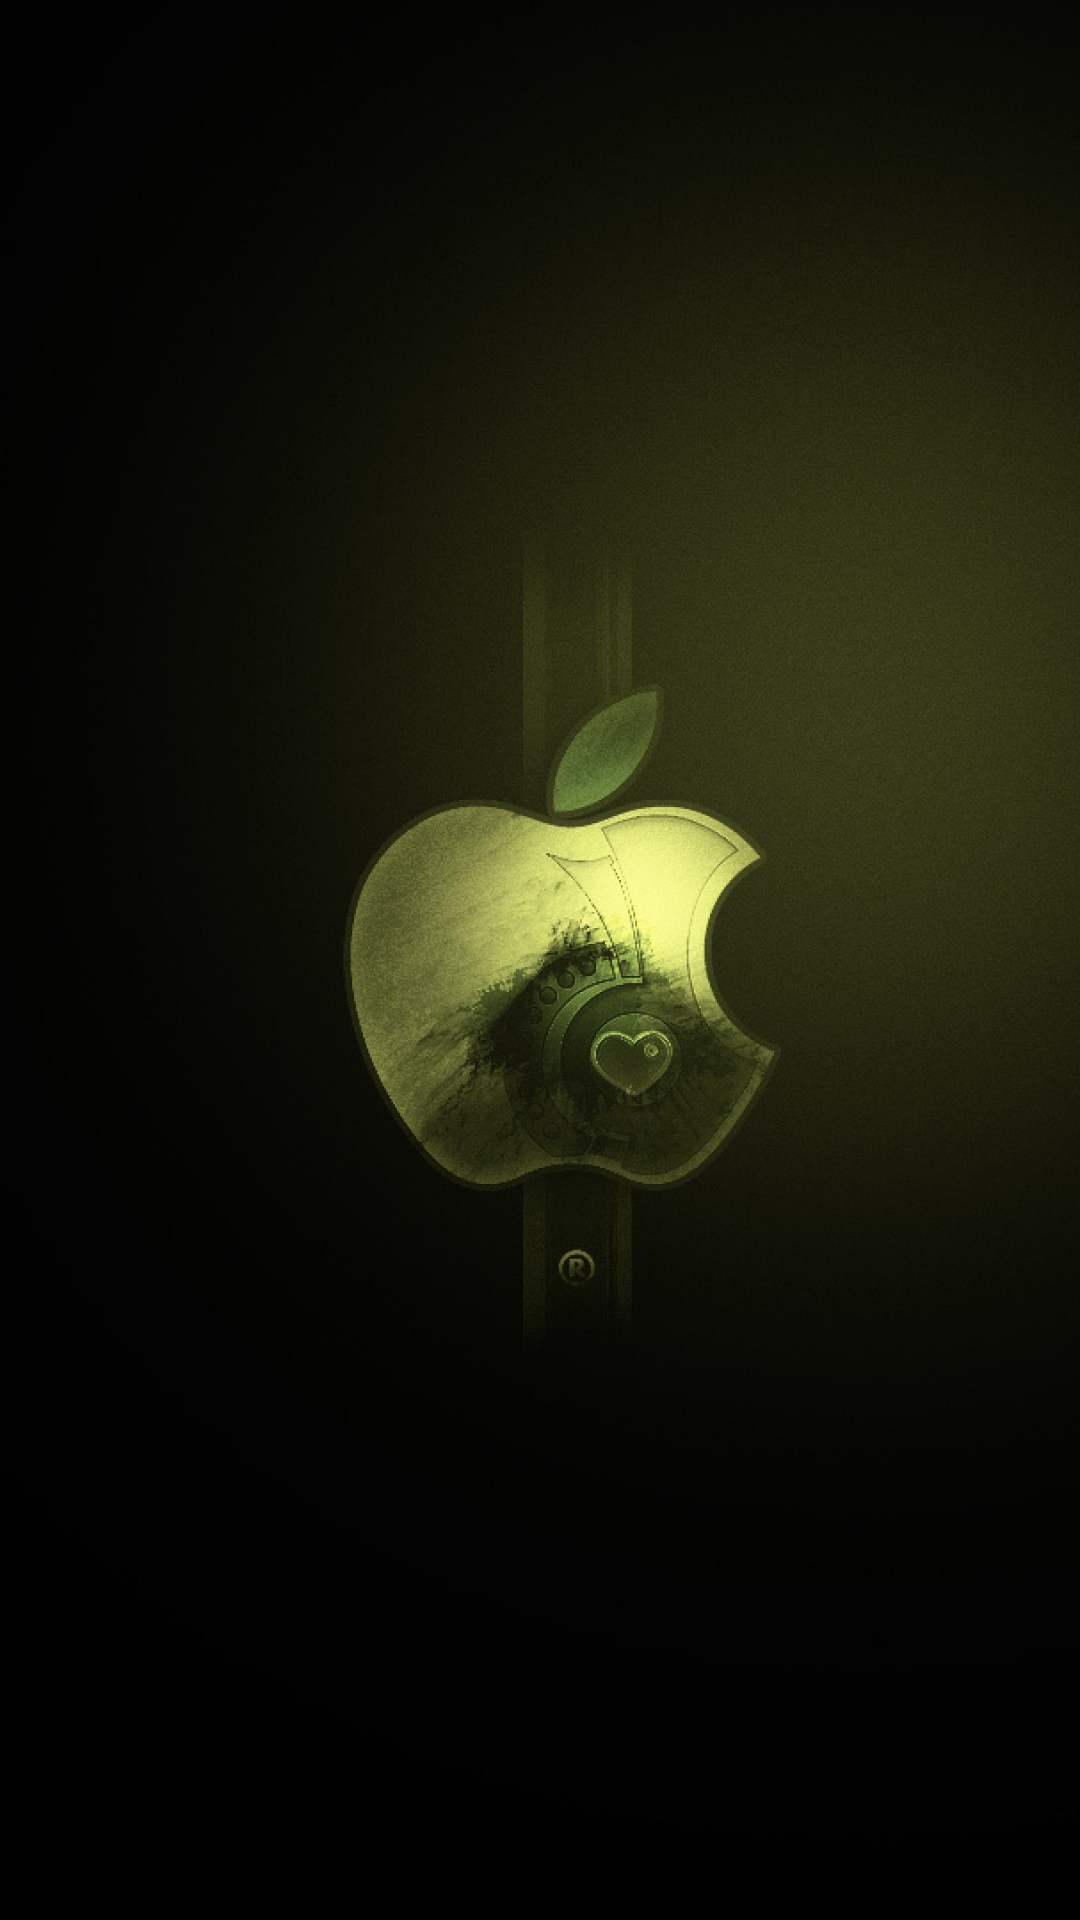 Cool Apple Logo Iphone Wallpapers